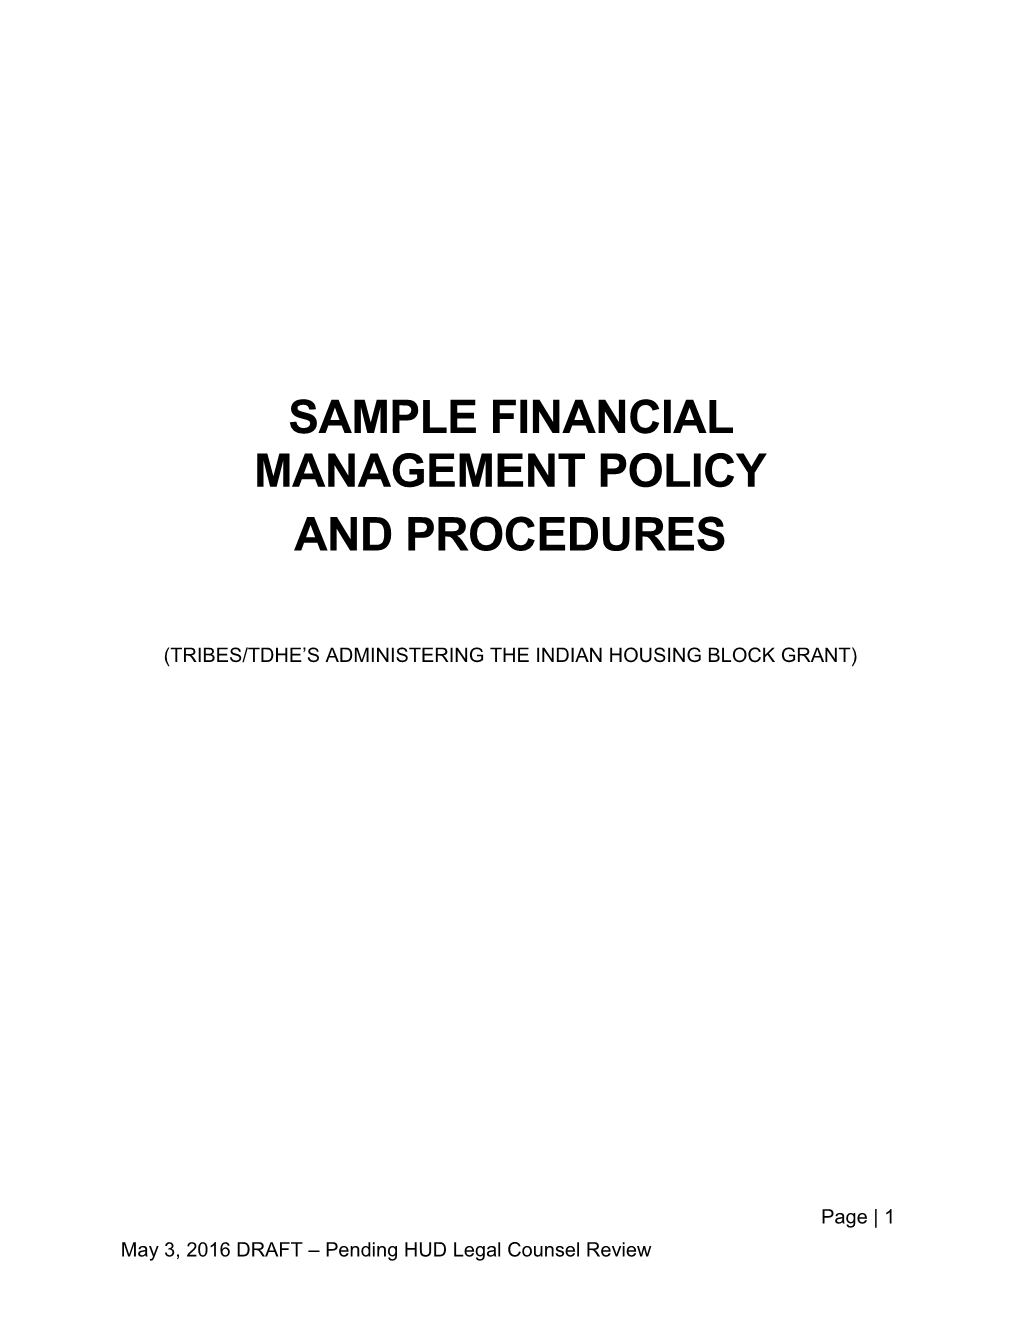 Sample Financial Management Policy